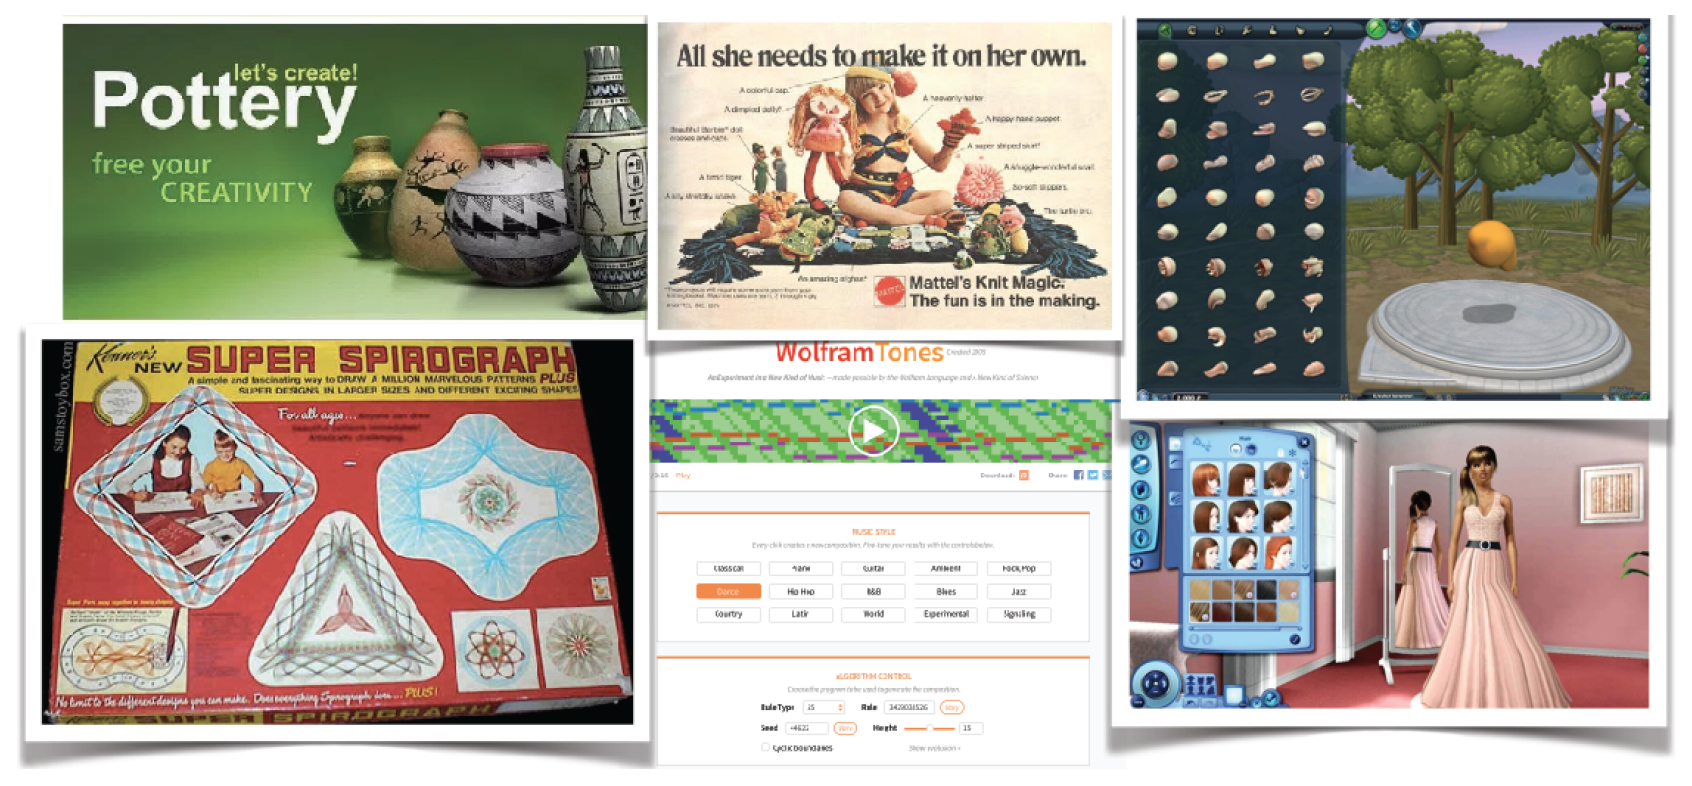 Some examples of casual creators: Let's Create Pottery, the Knitting Nancy, the Spore Creature Creator, Spirograph, Wolfram Tones, and The Sims Create-a-Sim editor